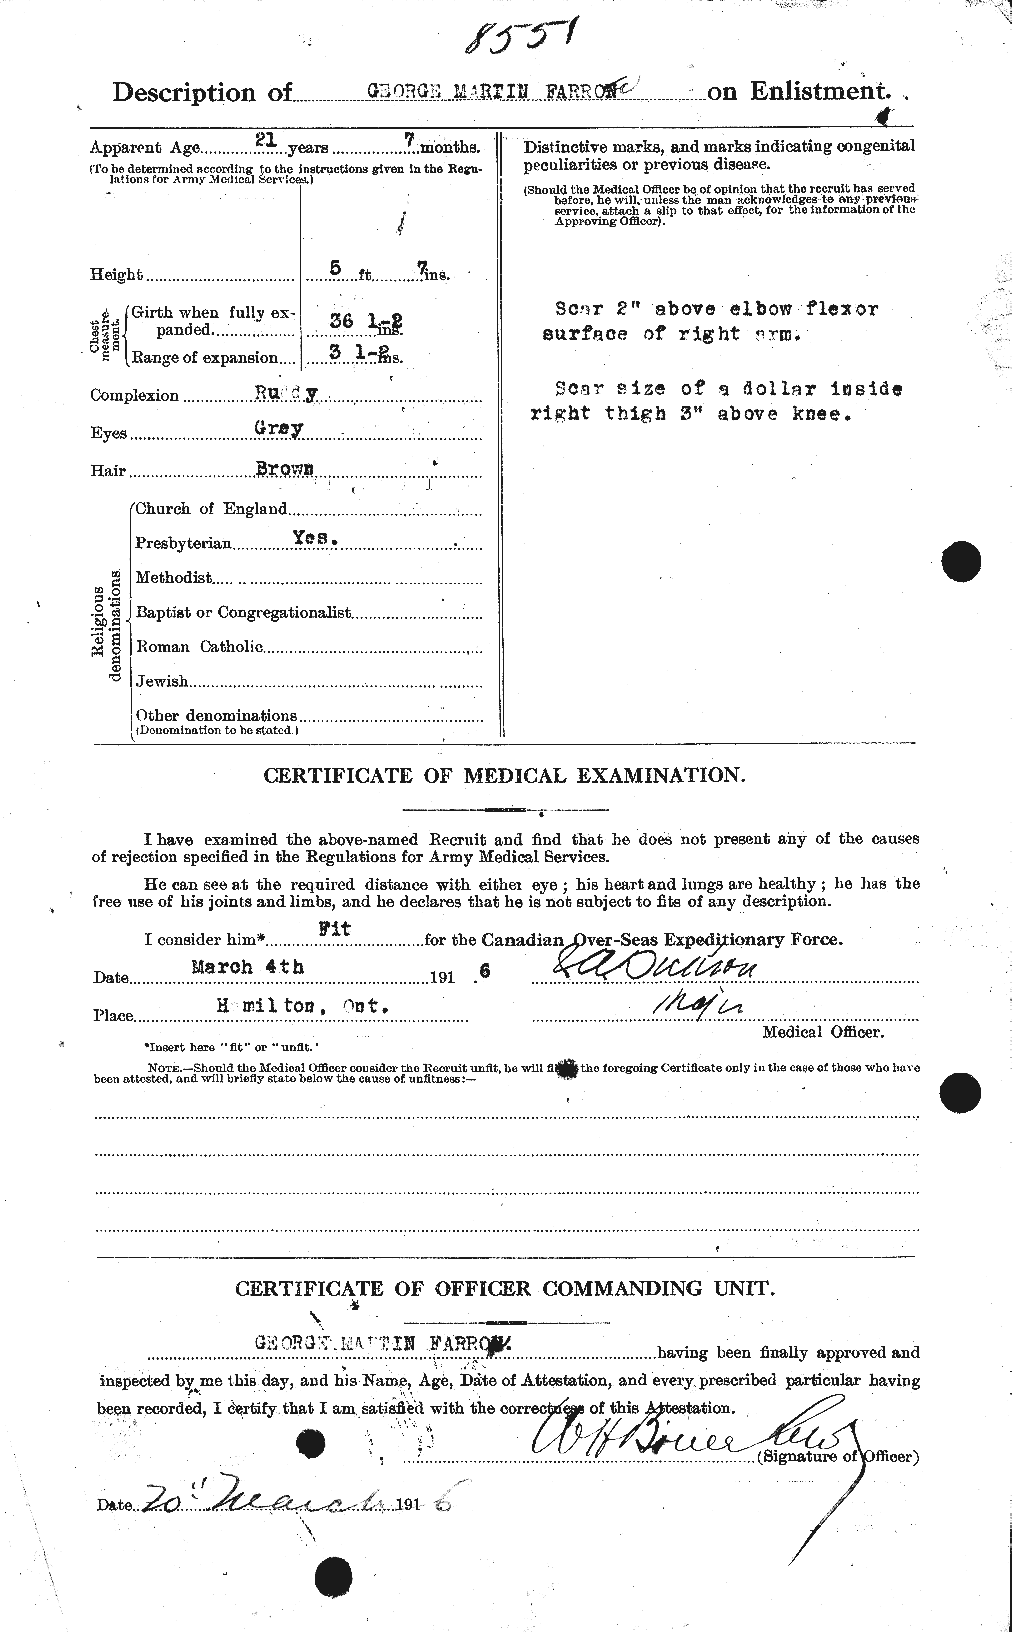 Personnel Records of the First World War - CEF 319161b